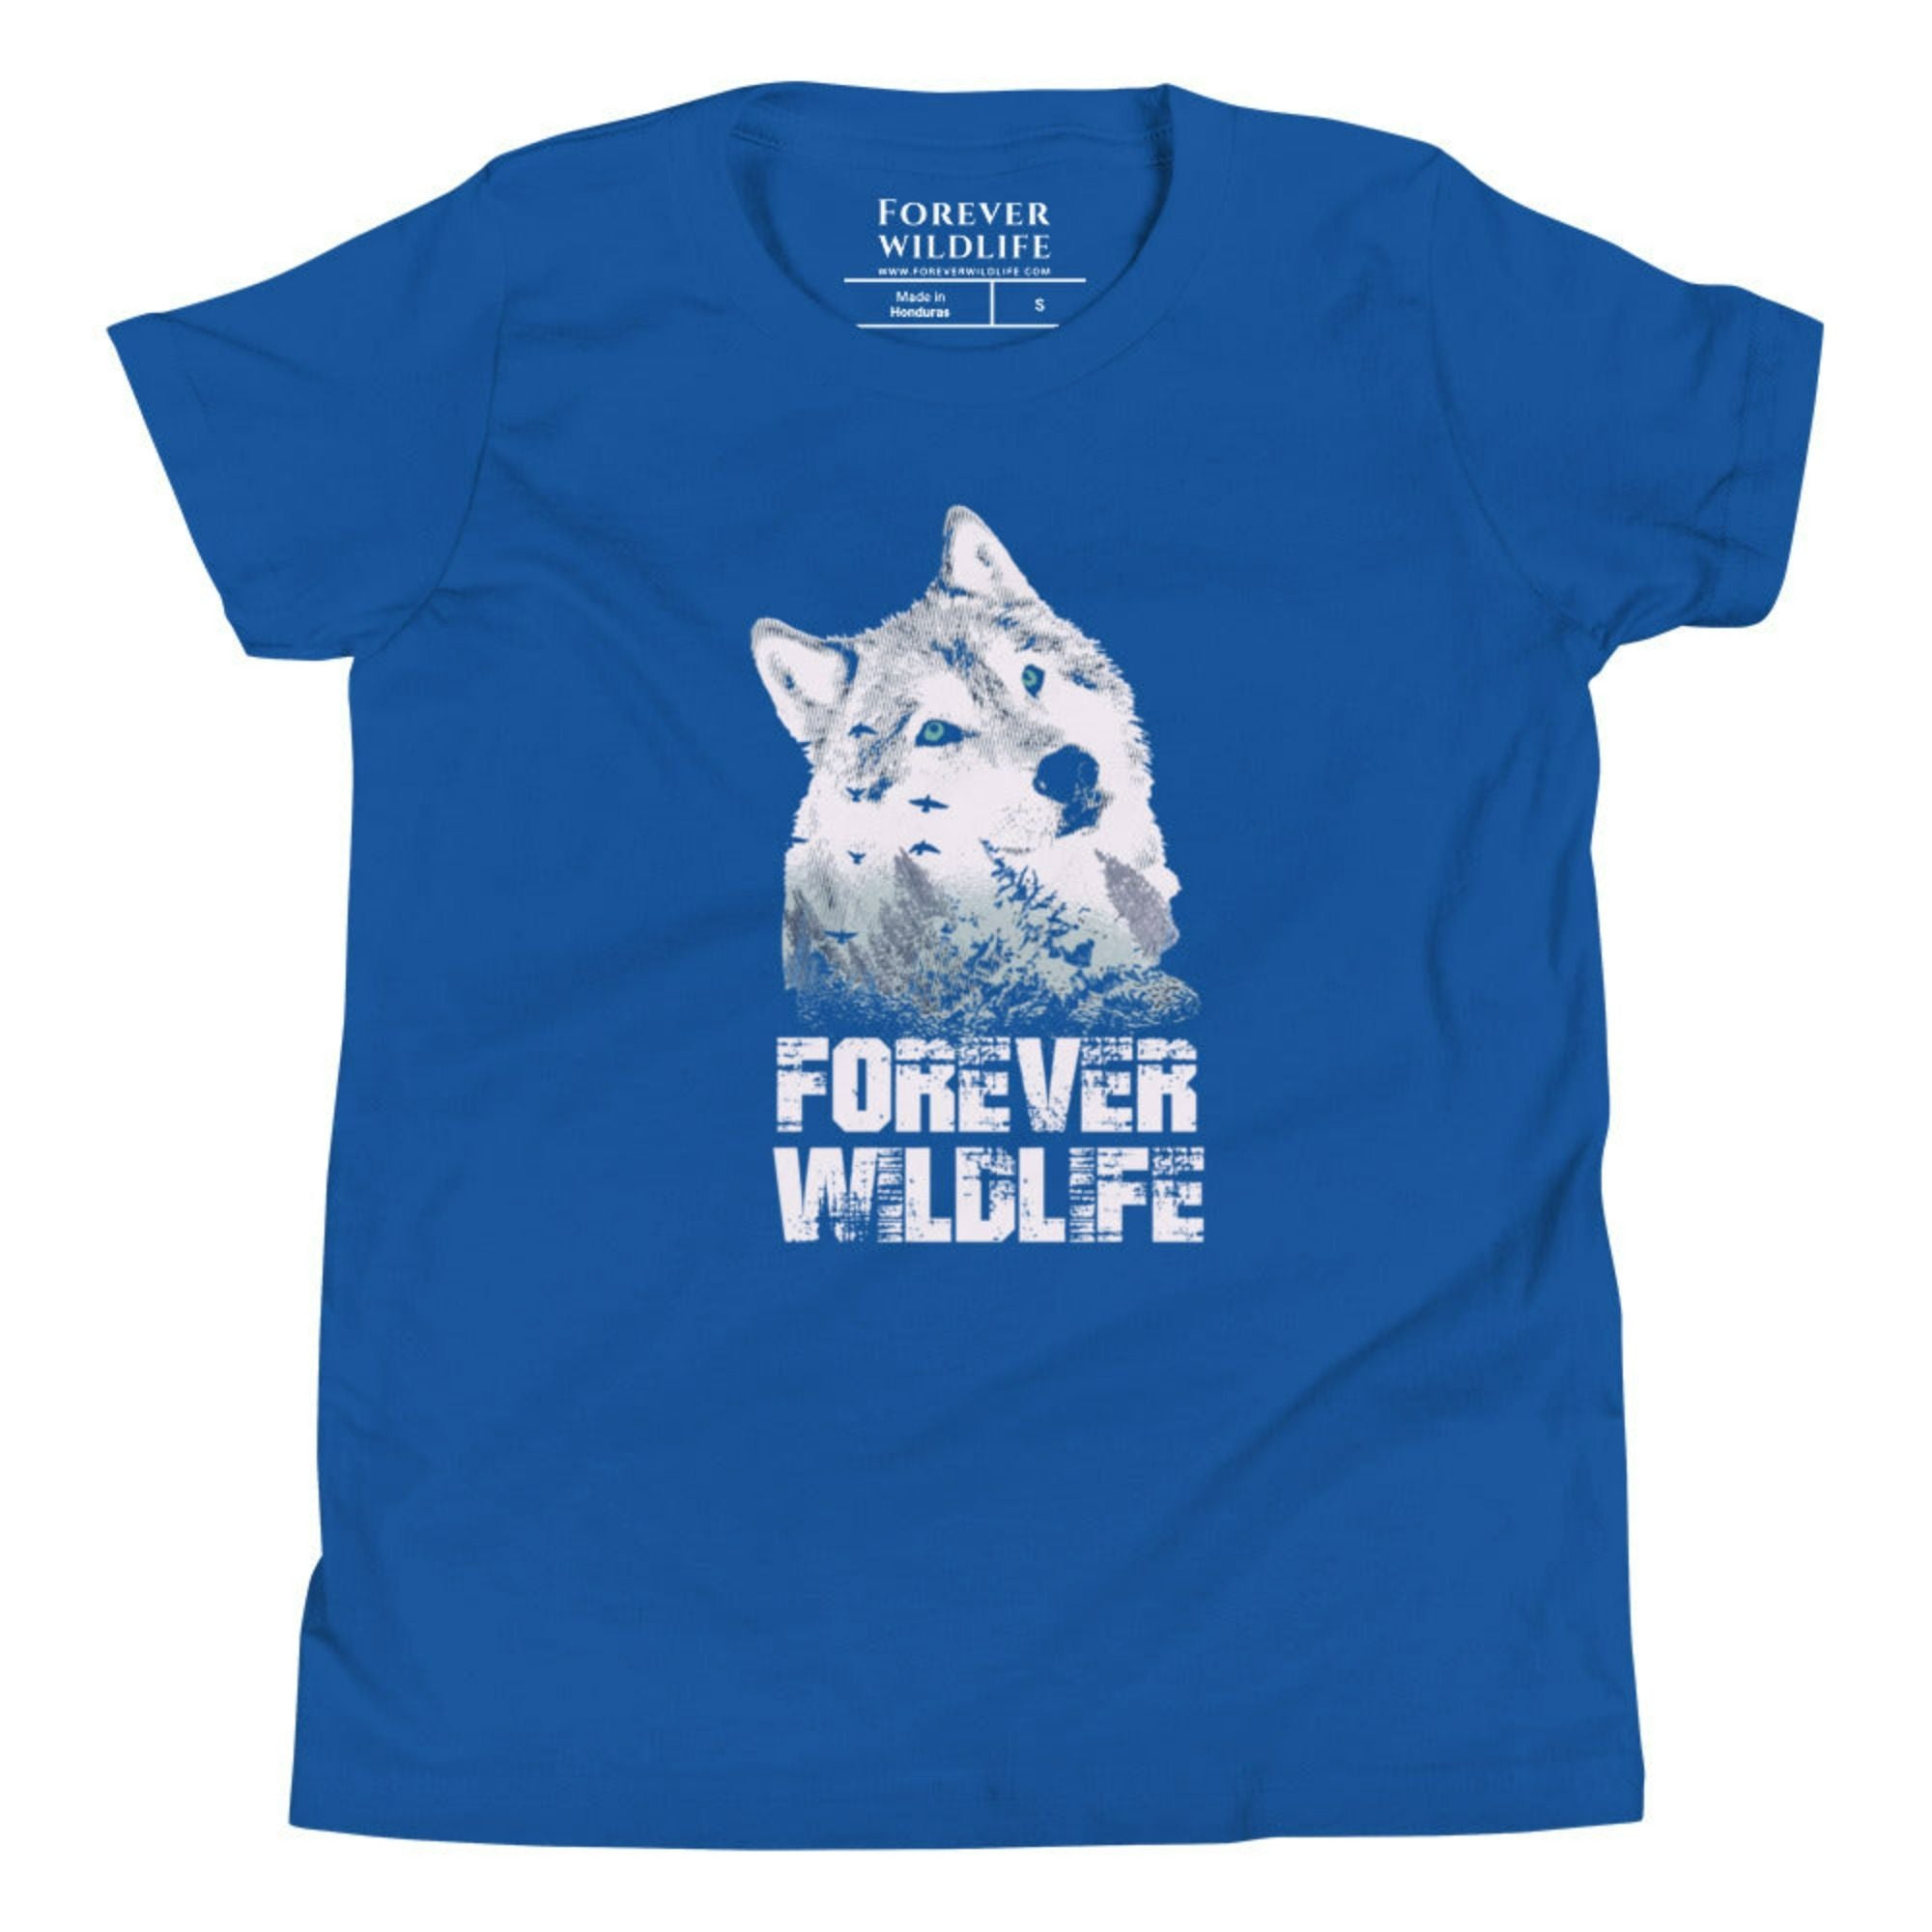 Royal Youth T-Shirt with Wolf graphic as part of Wildlife T Shirts, Wildlife Clothing & Apparel by Forever Wildlife